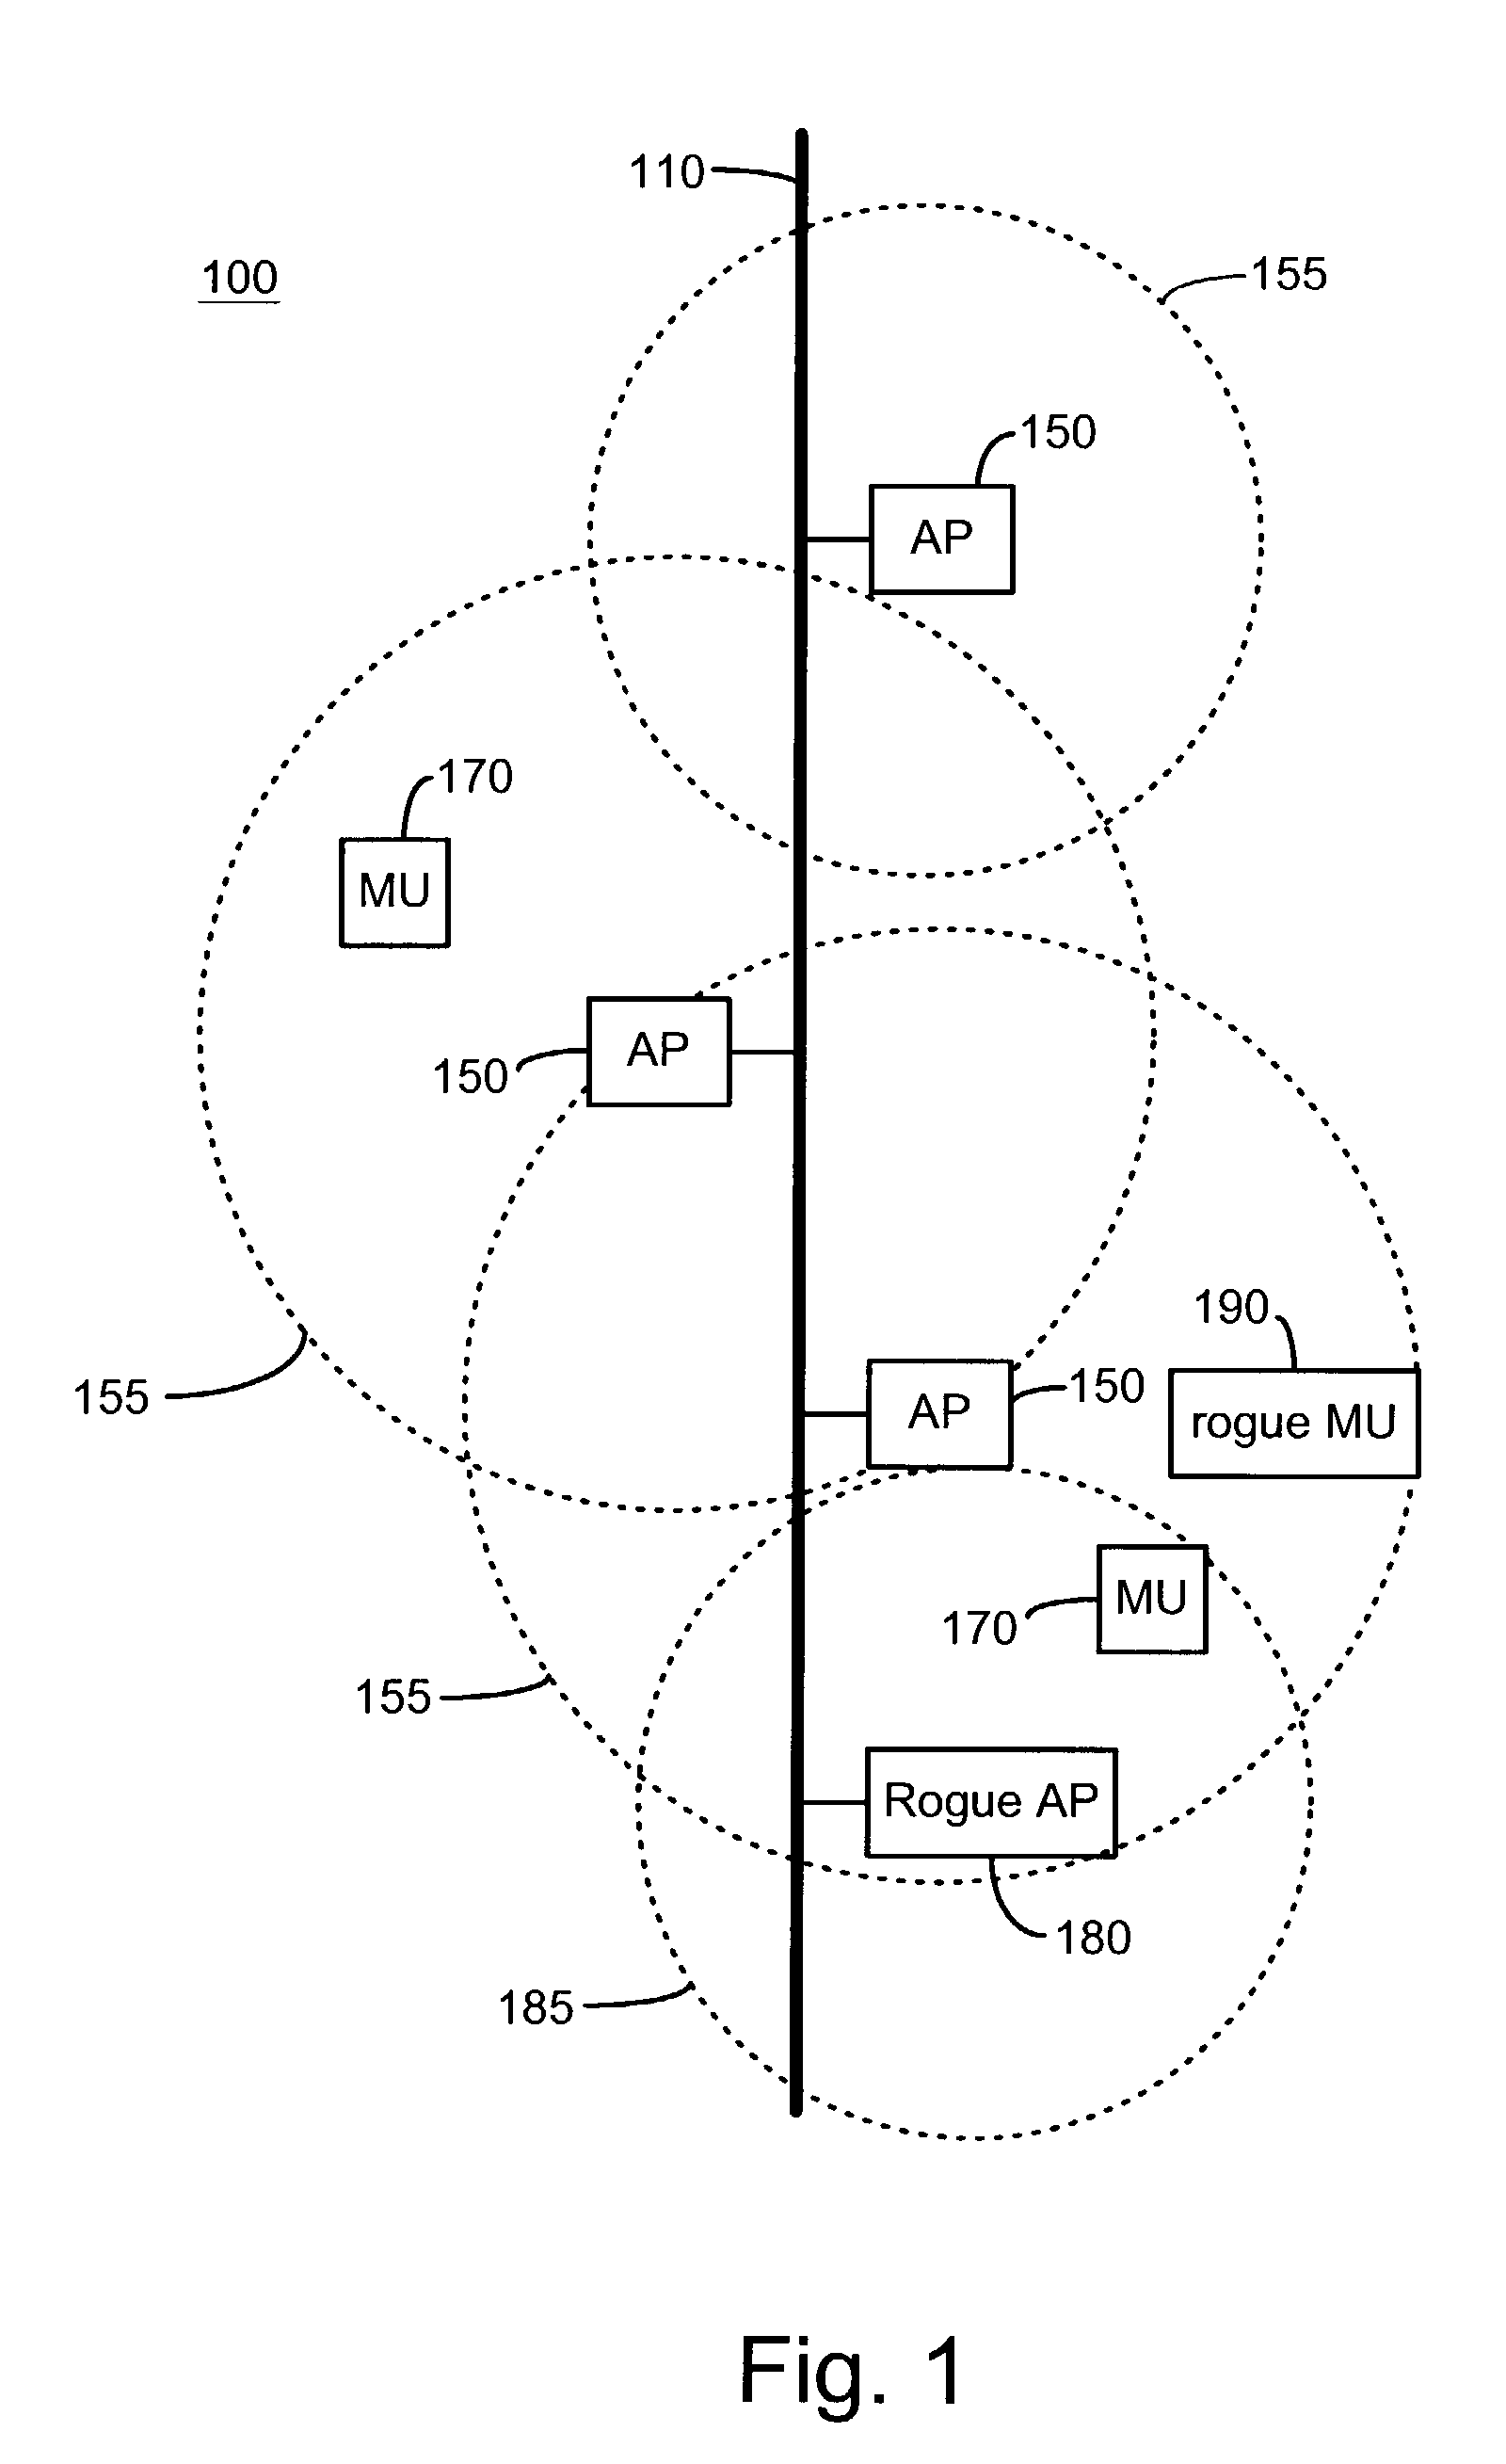 System and method for detecting unauthorized wireless access points